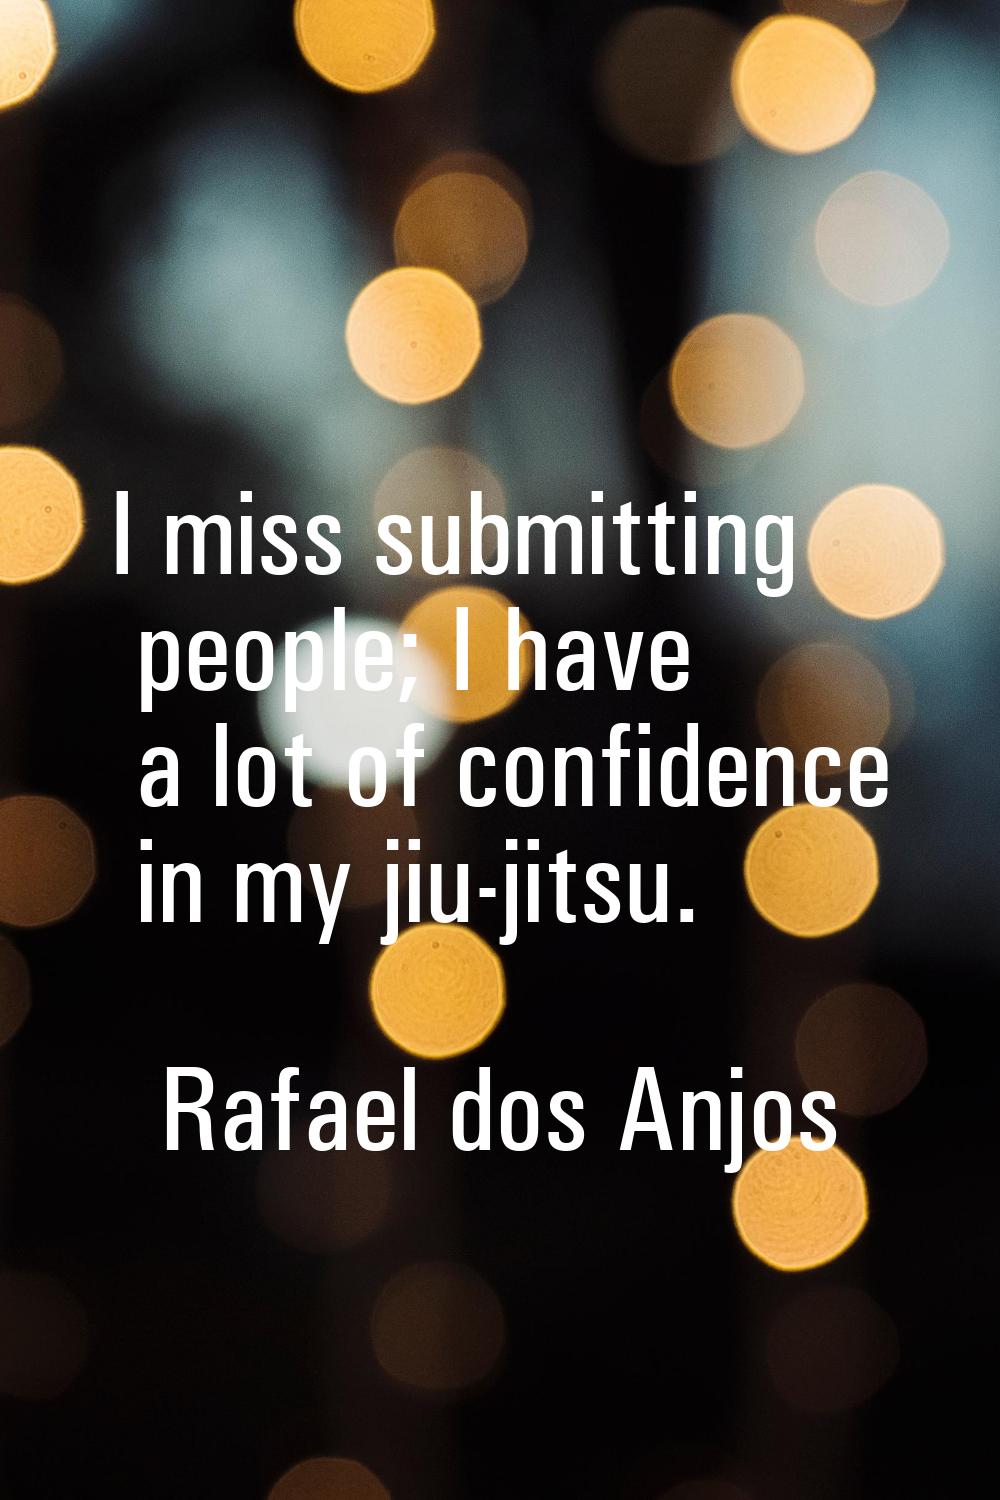 I miss submitting people; I have a lot of confidence in my jiu-jitsu.